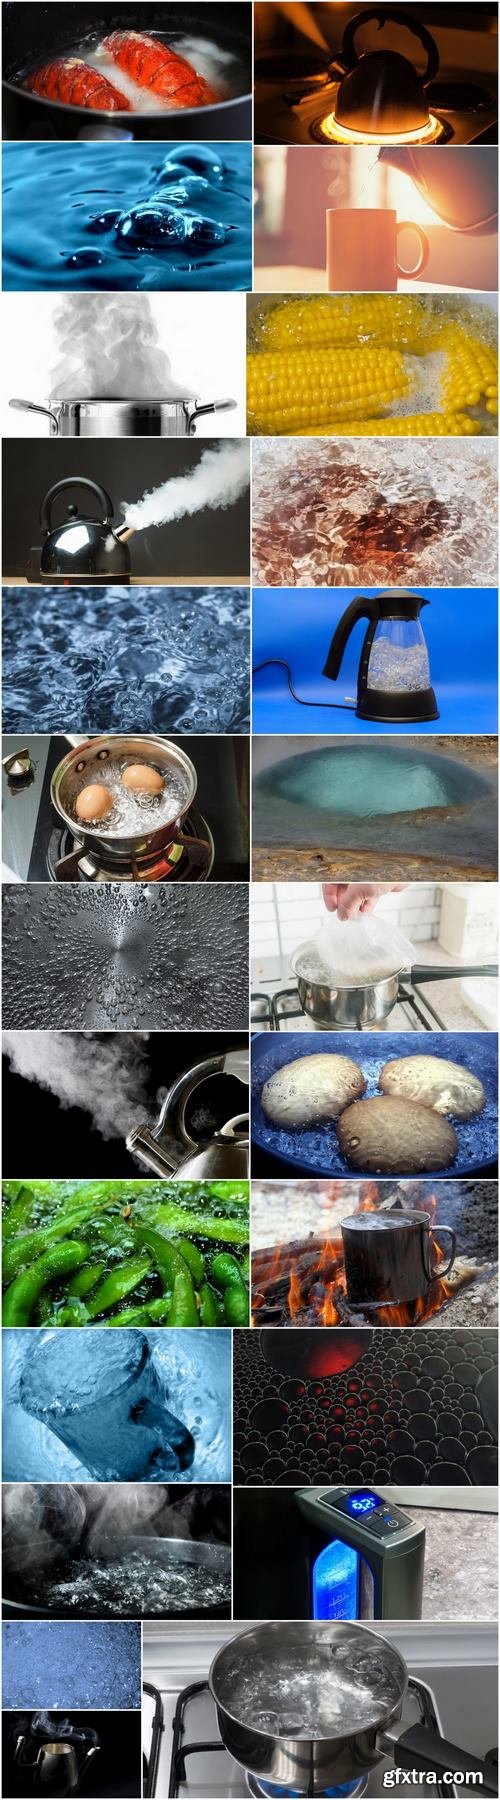 Boiling water steam cooking boiled food products 25 HQ Jpeg